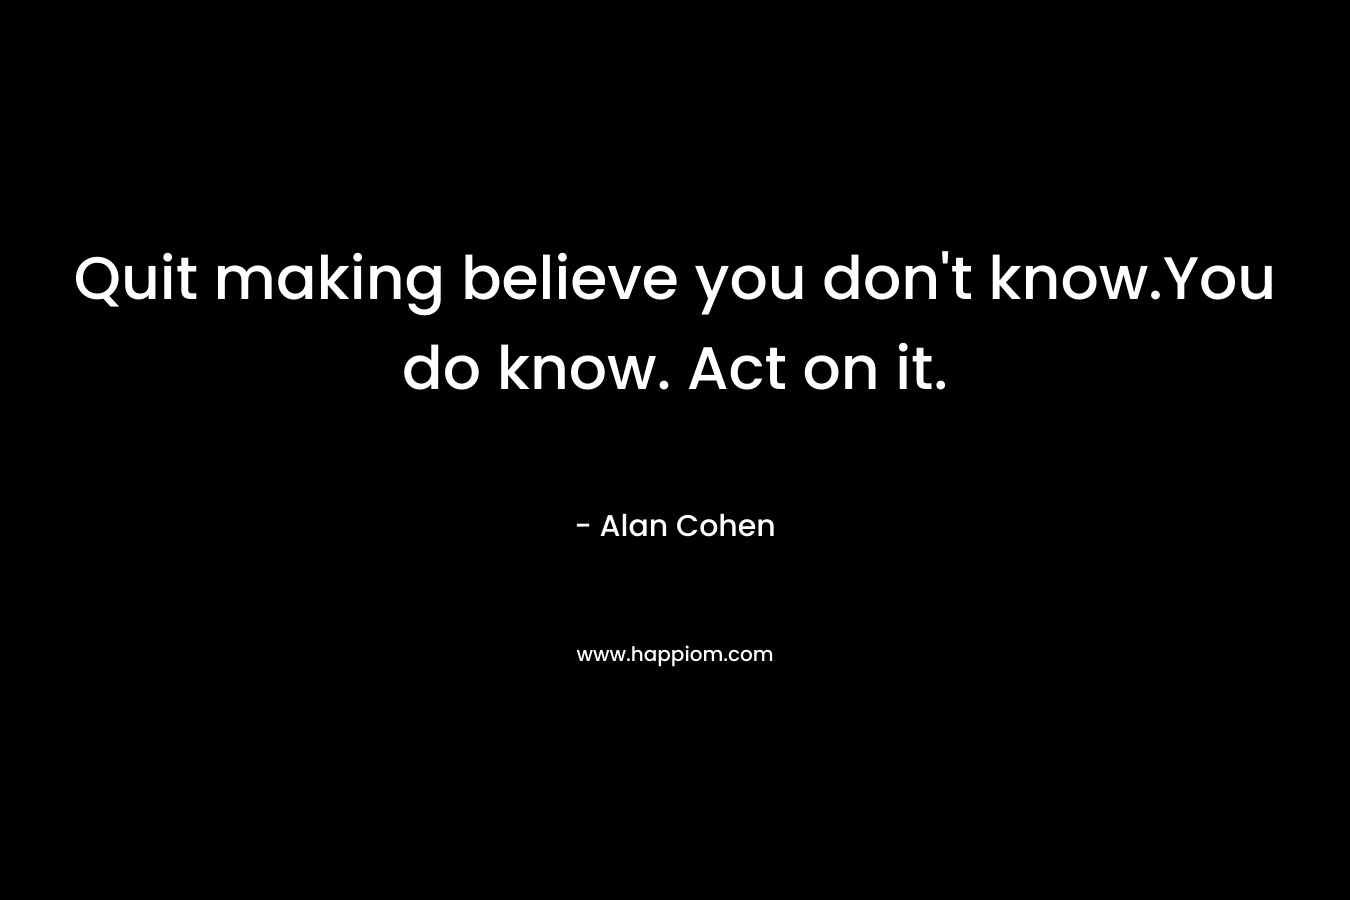 Quit making believe you don't know.You do know. Act on it.